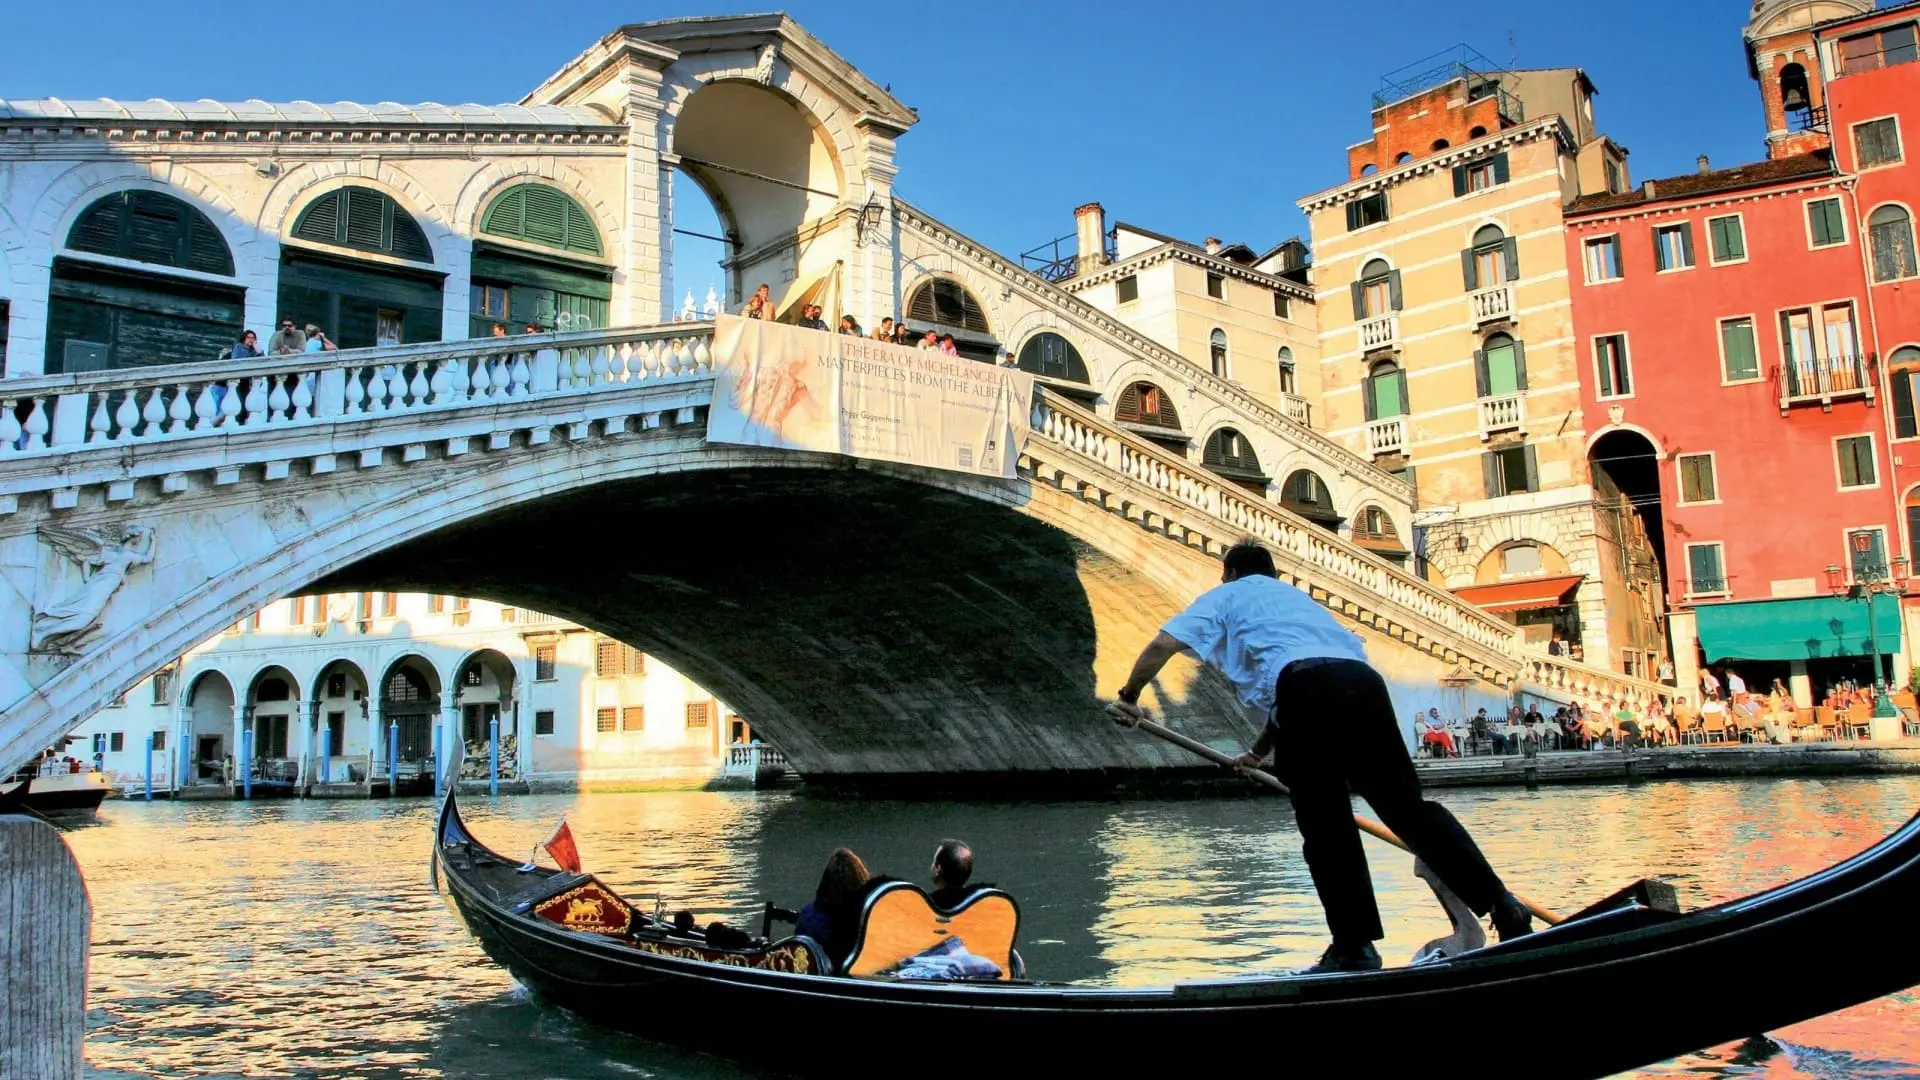 The Best of Venice: Morning Walking tour, Shared Gondola Ride and St Mark&rsquo;s Basilica Skip-the-line Guided Visit